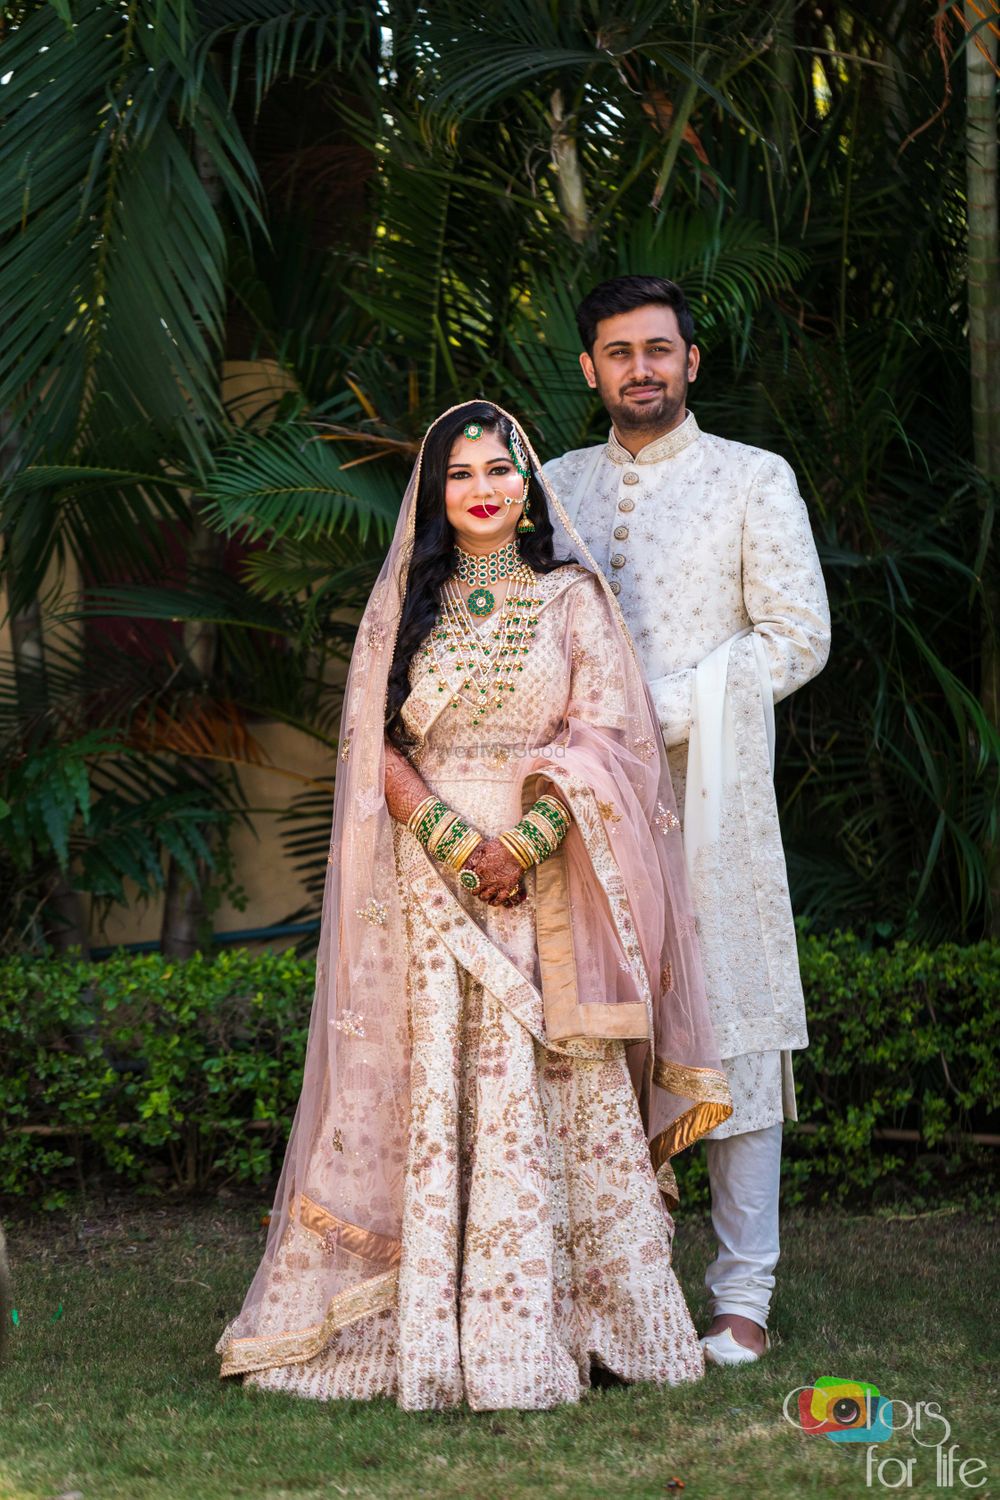 Photo From Isha and Amir - By Colors For Life